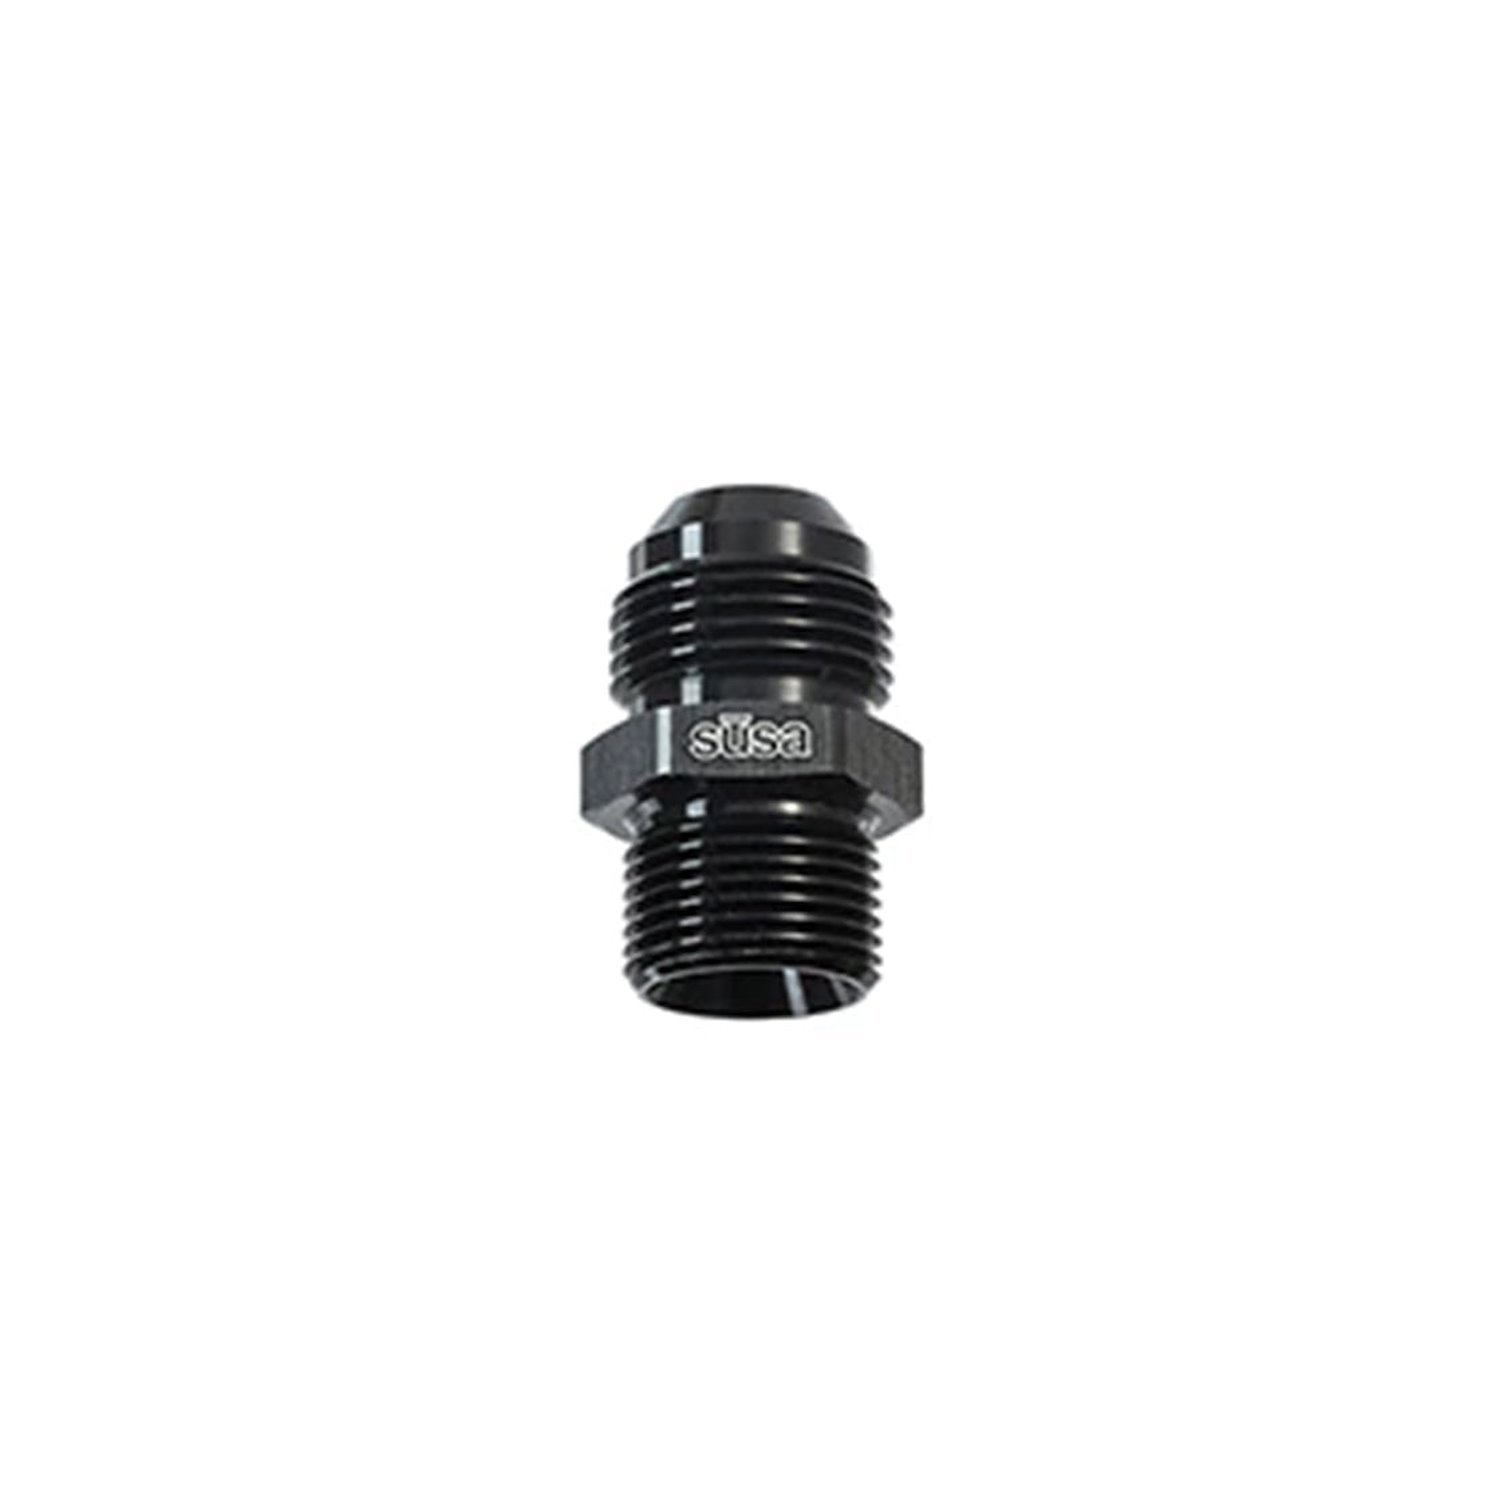 22-M16AN08-00 Adapter Fitting, M16 Male to AN08 Male, Straight